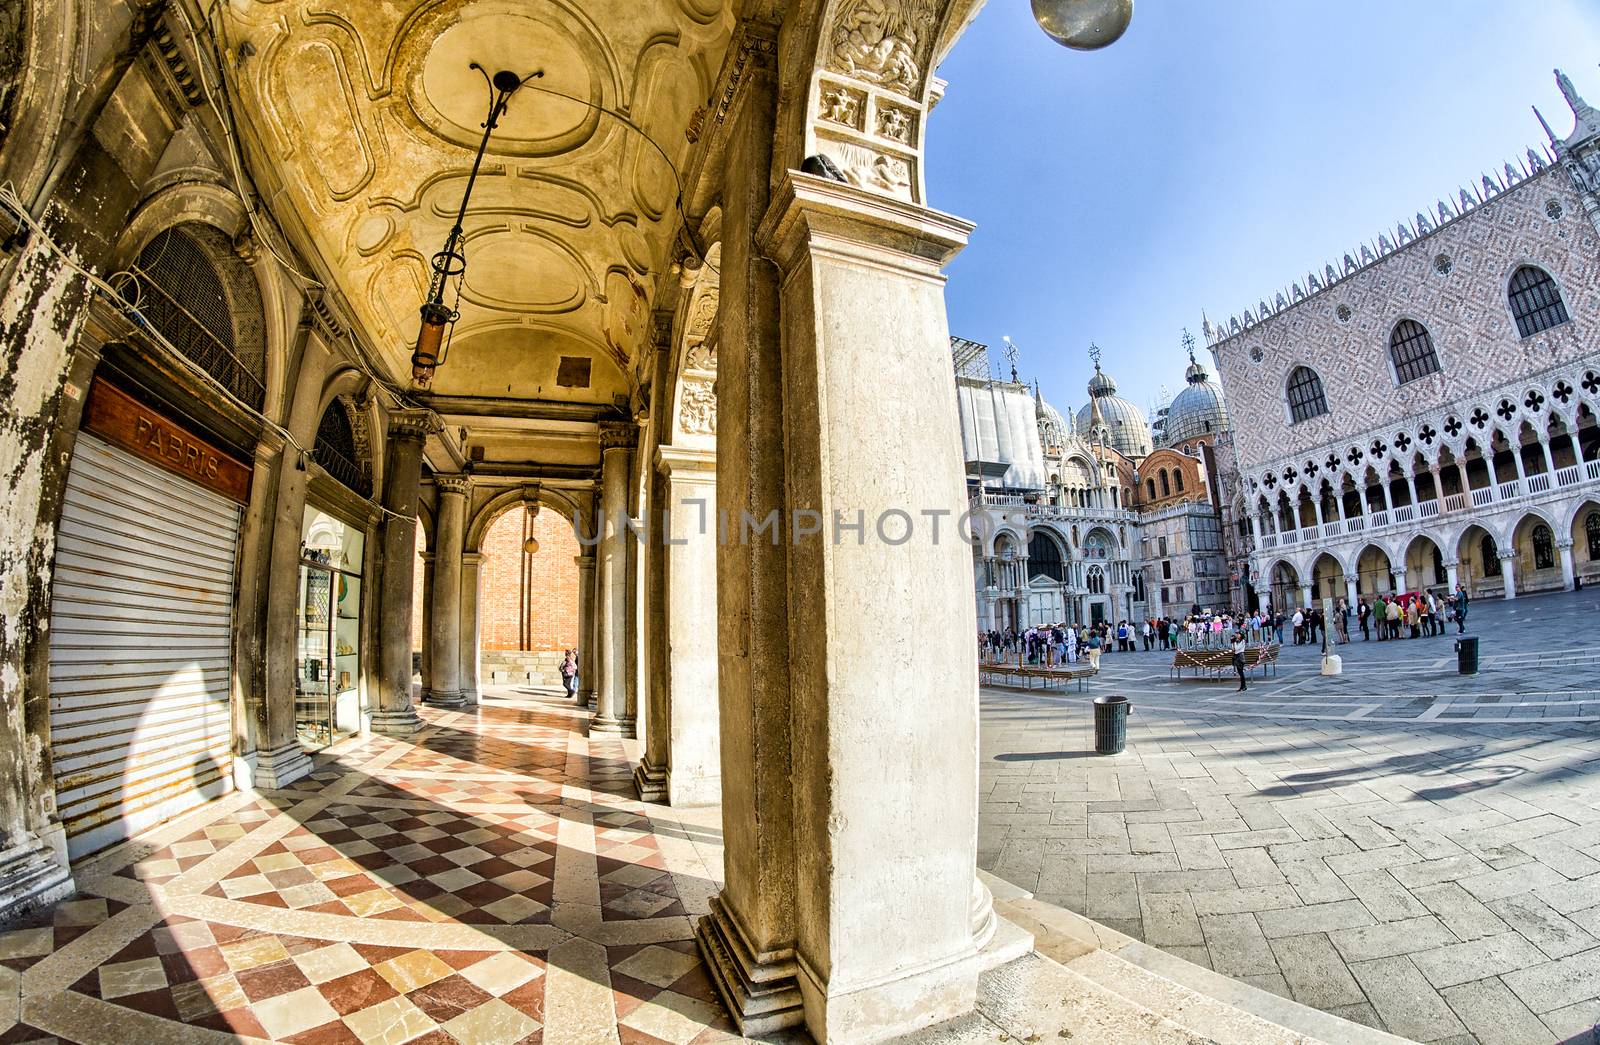 VENICE - APRIL 7, 2014: Tourists enjoy Saint Mark Square on a beautiful spring day. Venice is visted by more than 20 million people every year.